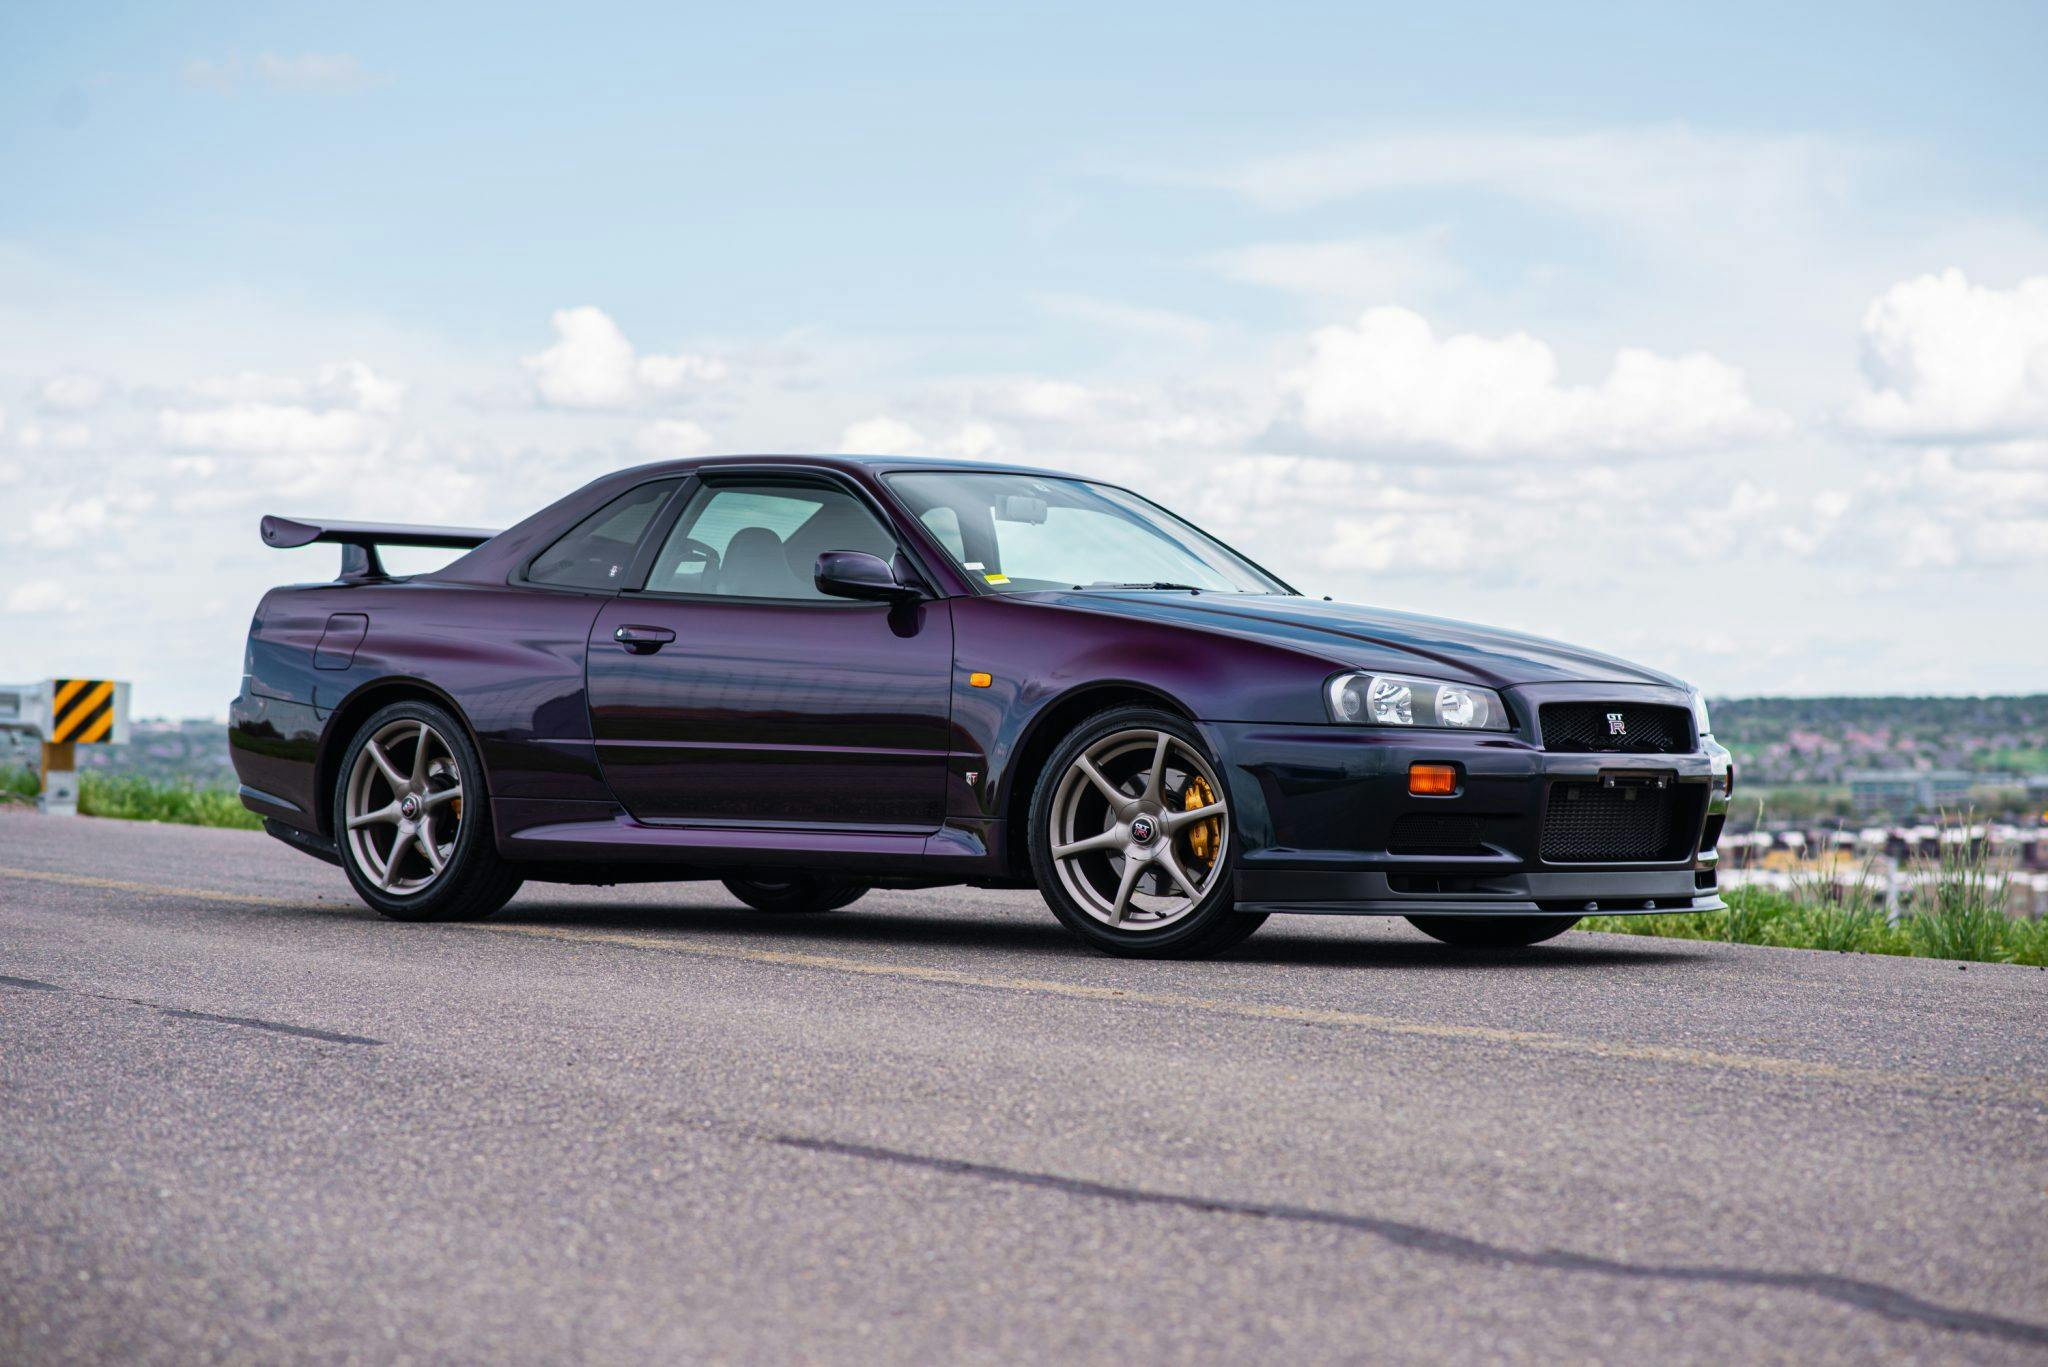 Buyers asking up to $1 million for final Nissan GT-R 